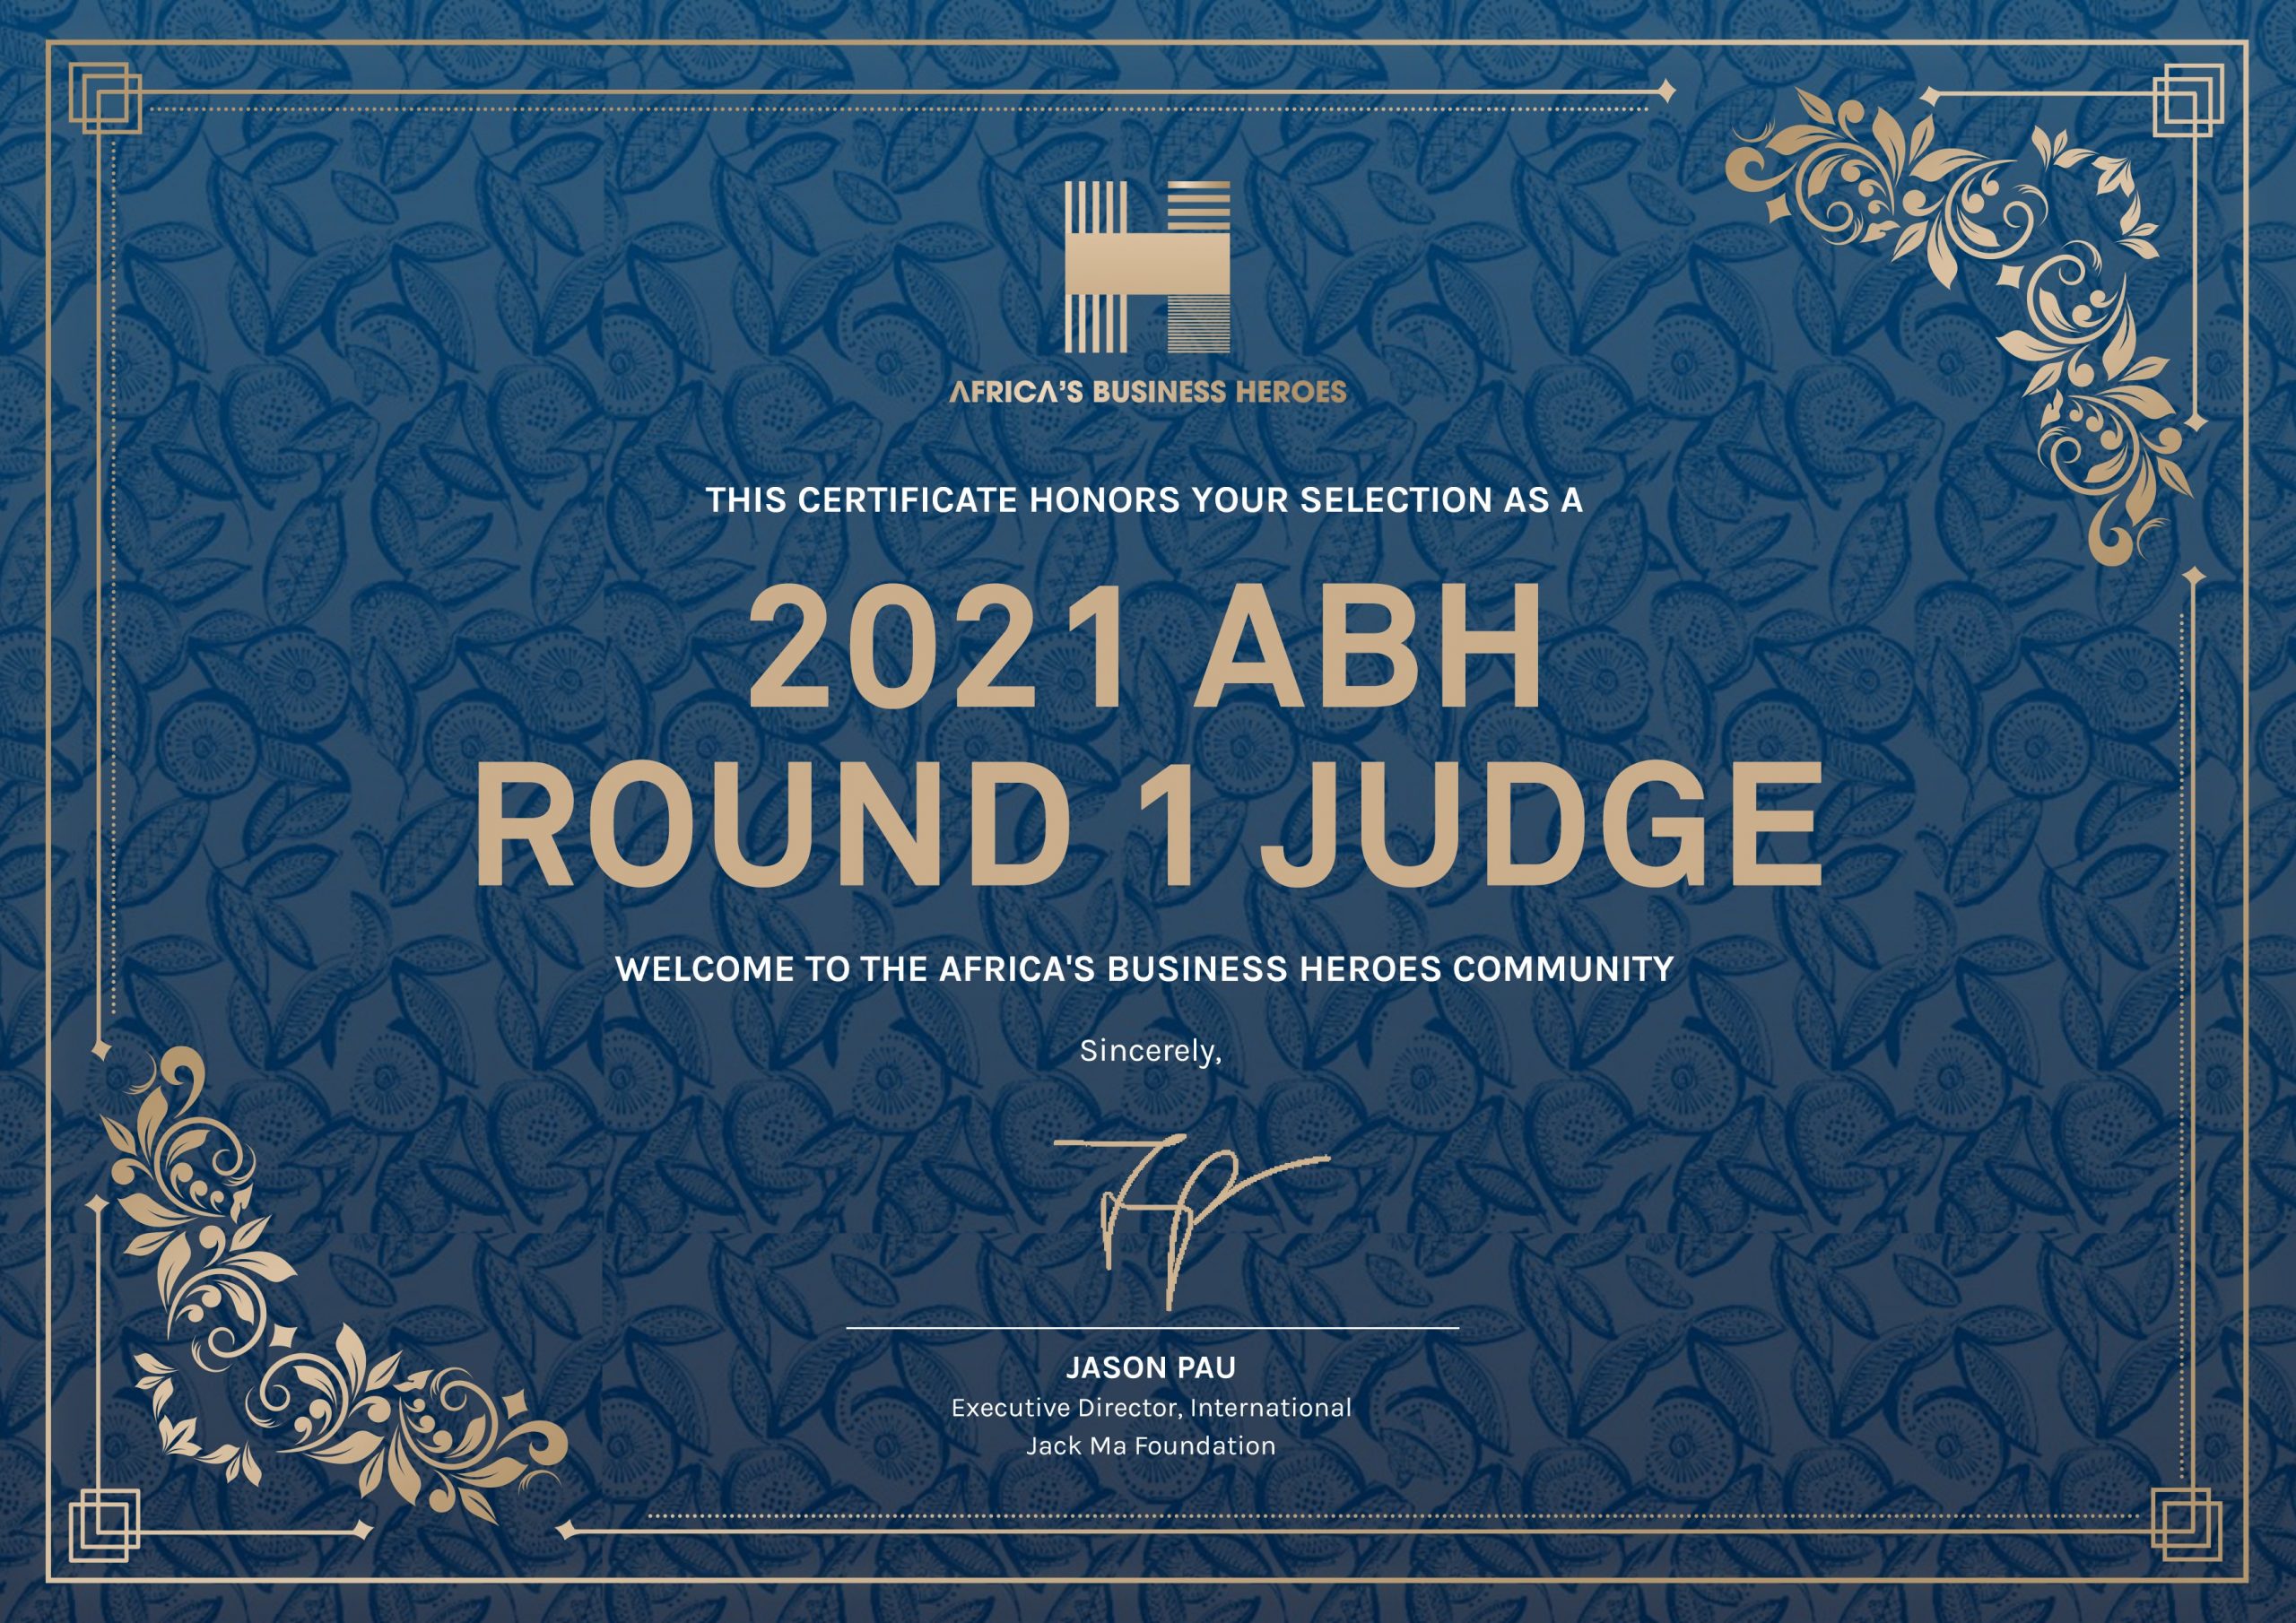 Africa Business Heroes 2021 Judging